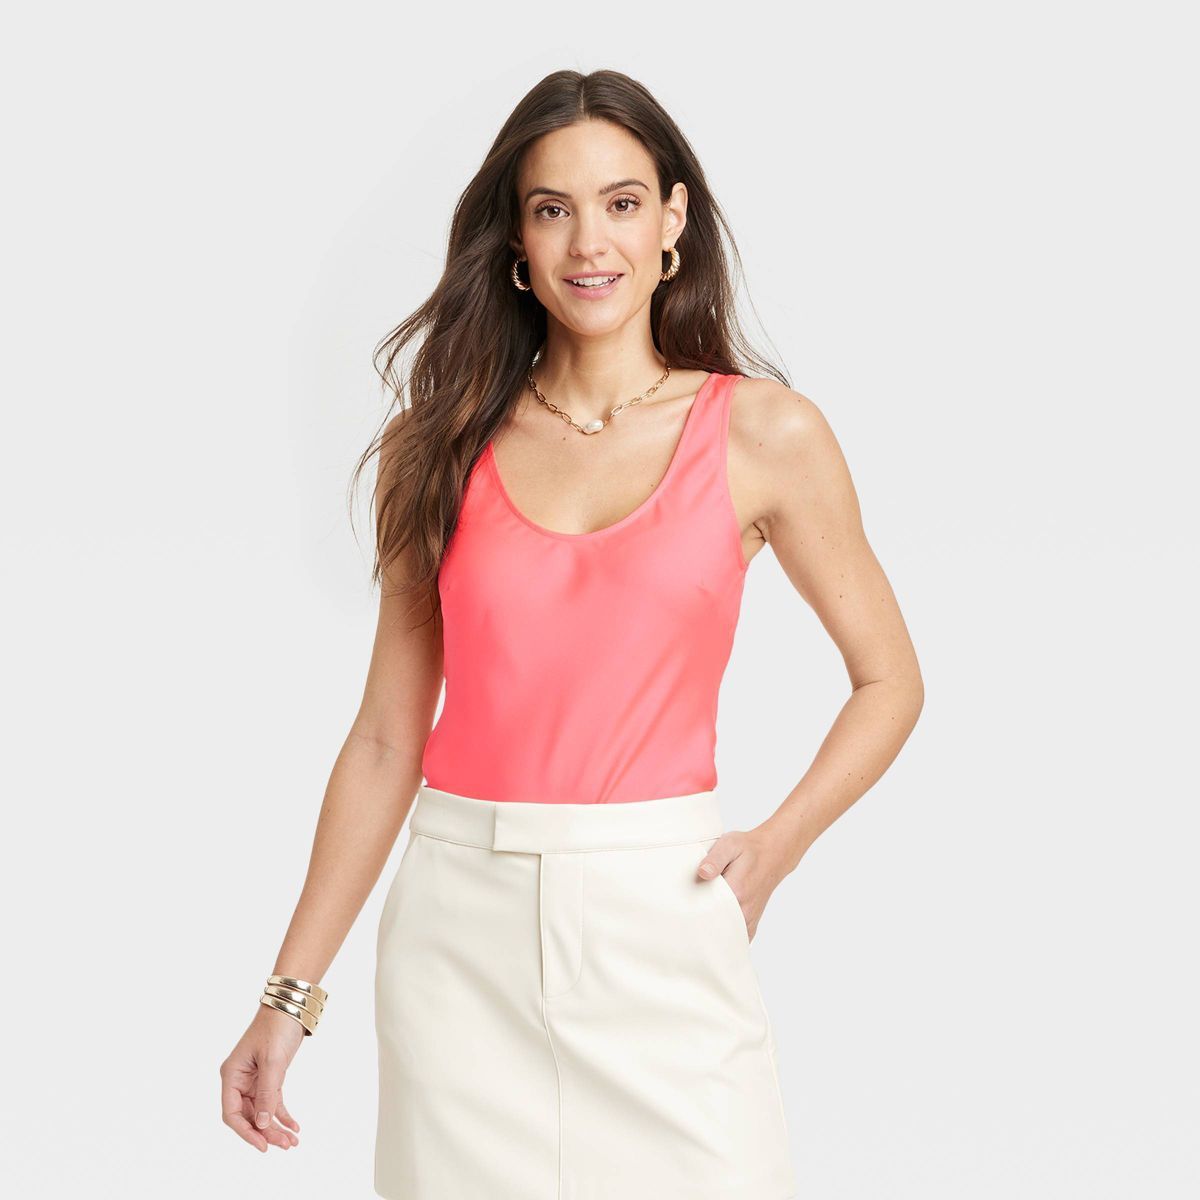 Women's Woven Shell Tank Top - A New Day™ | Target